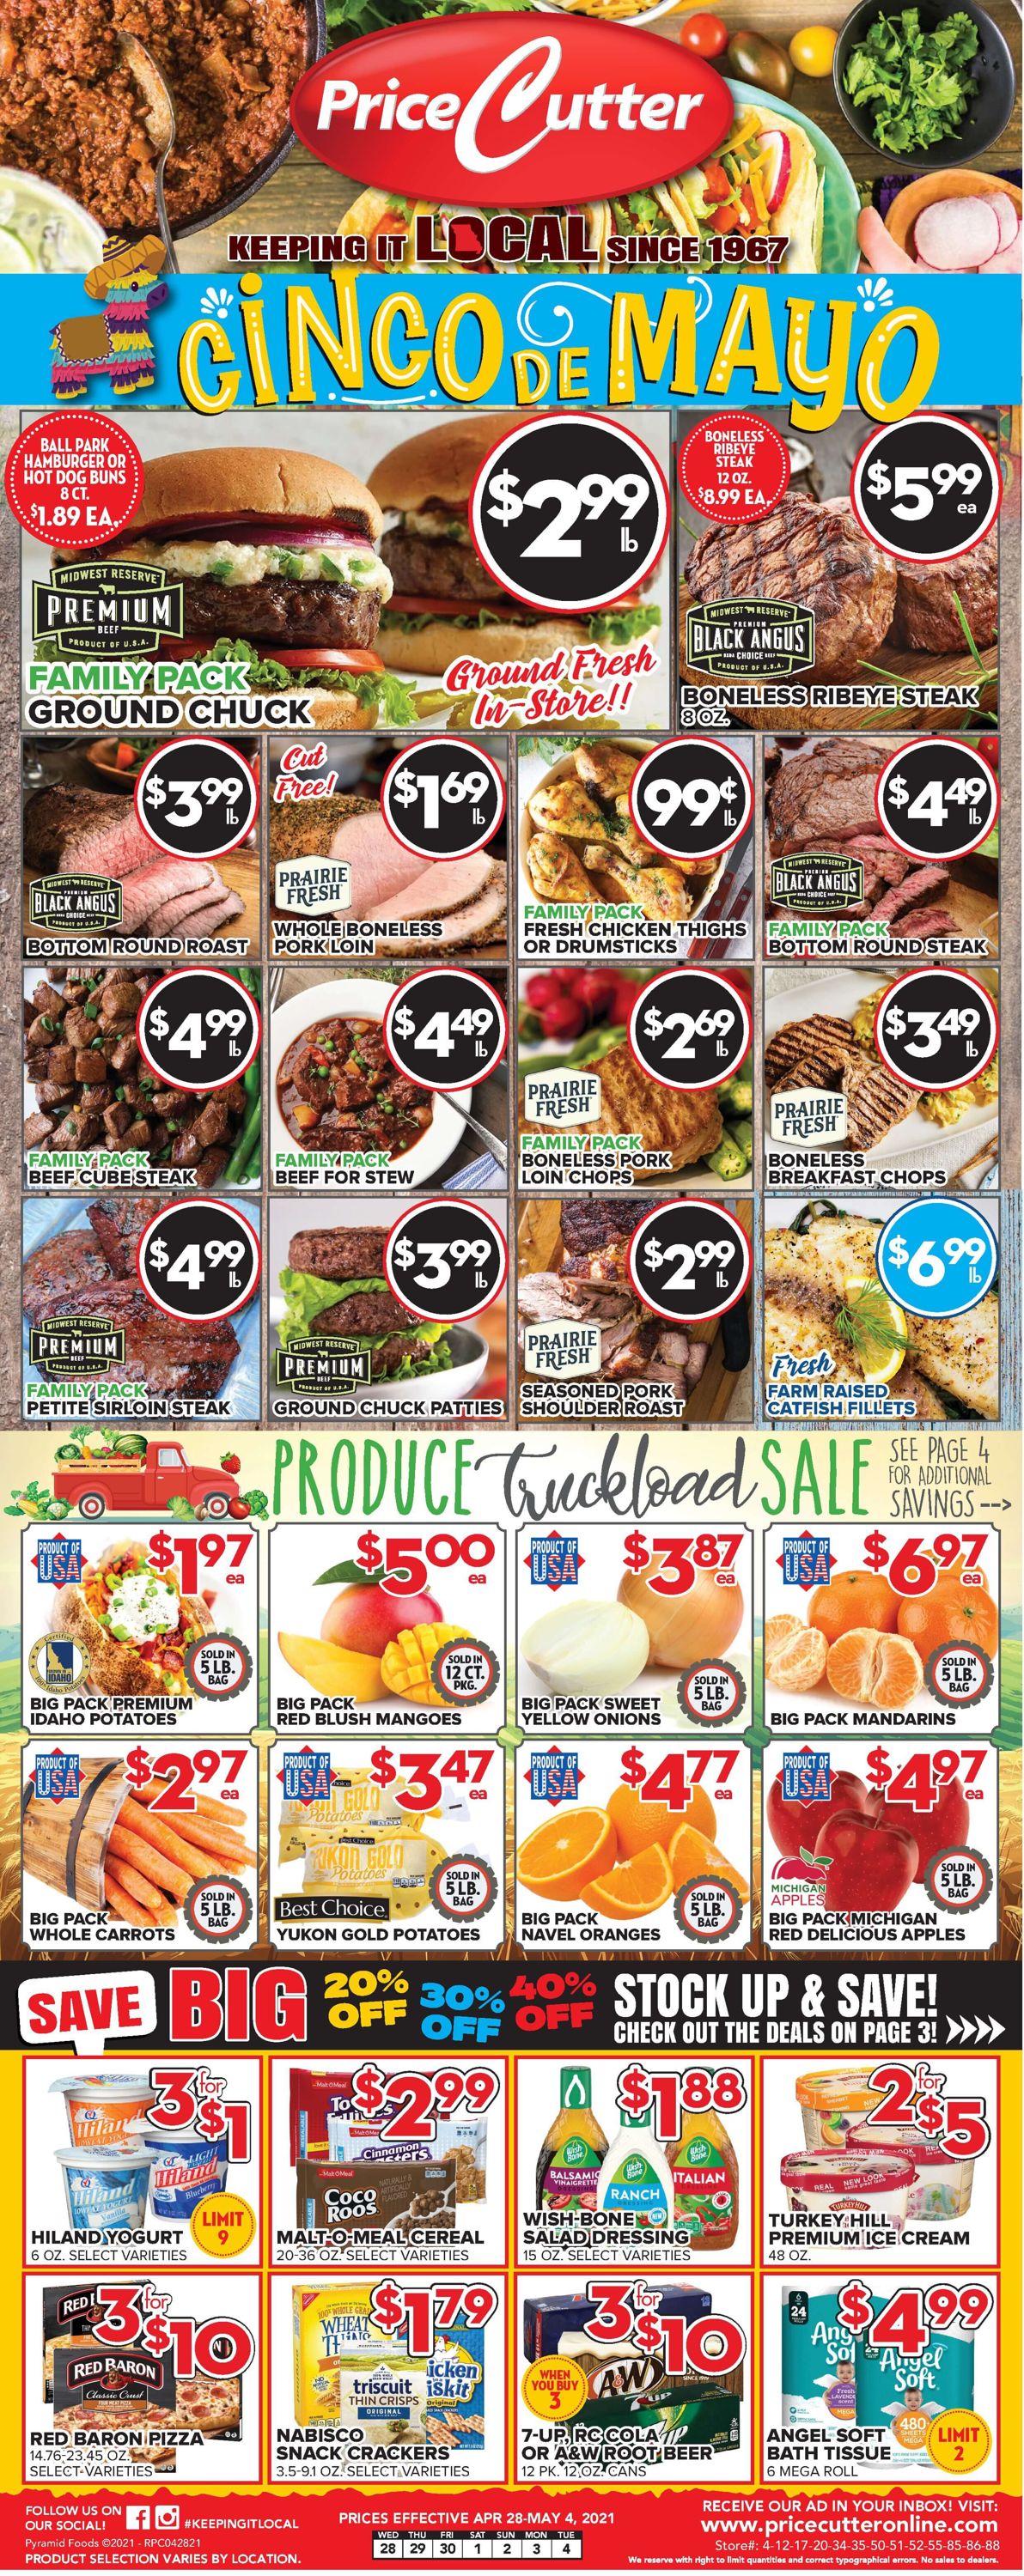 Price Cutter Weekly Ad Circular - valid 04/28-05/04/2021